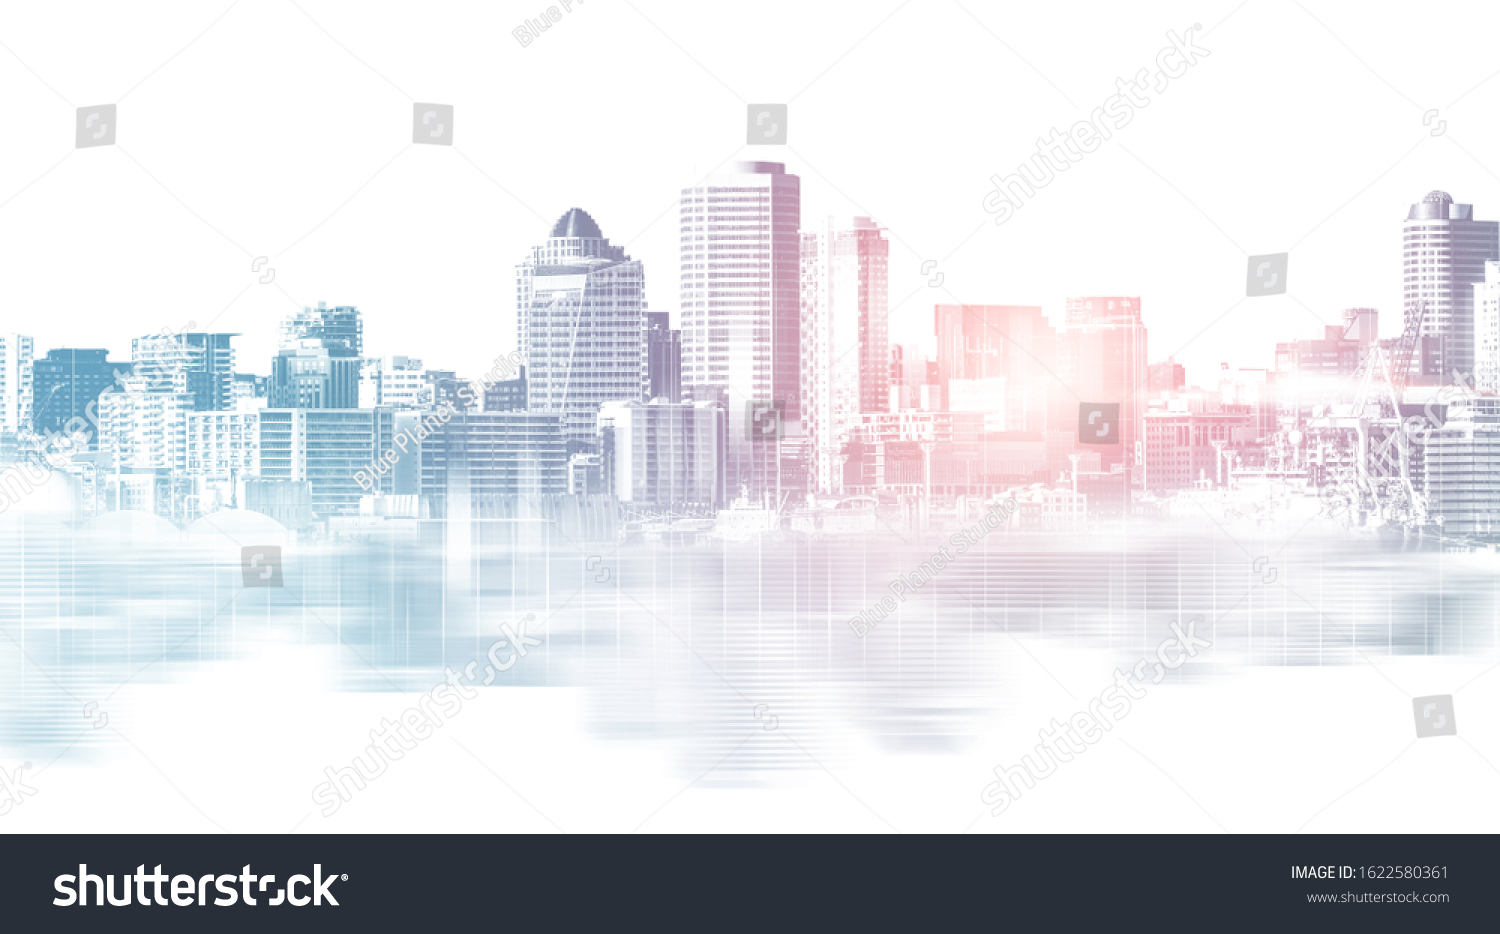 Abstract city building skyline metropolitan area in contemporary color style and futuristic effects. Real estate and property development. Innovative architecture and engineering concept. #1622580361